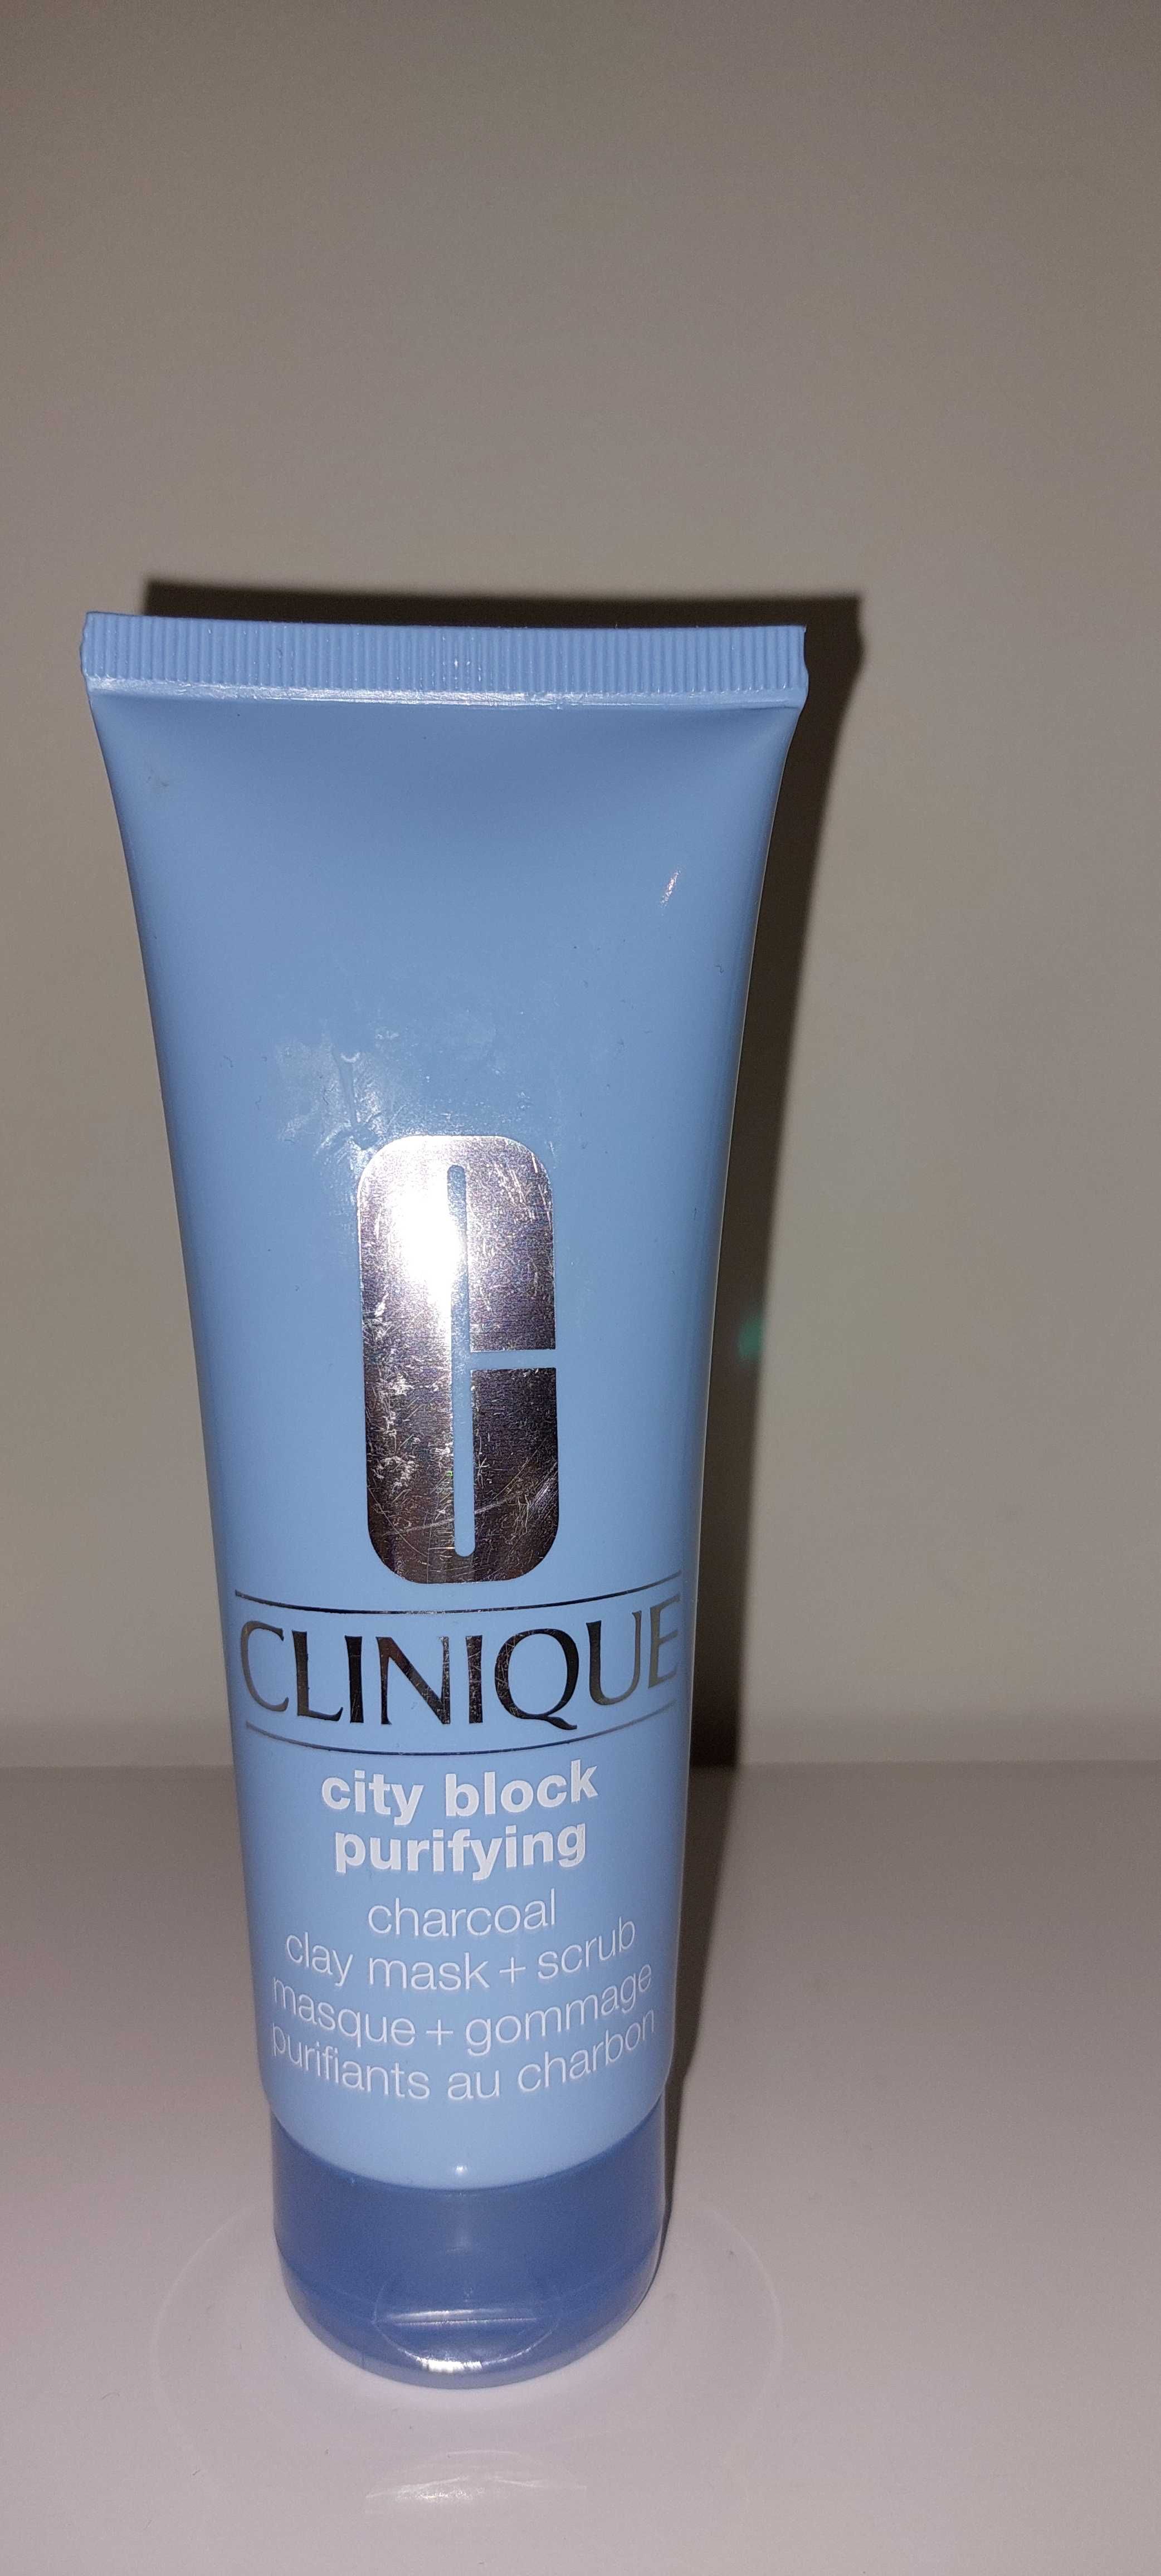 Clinique City Block Purifying Charcoal Clay Mask